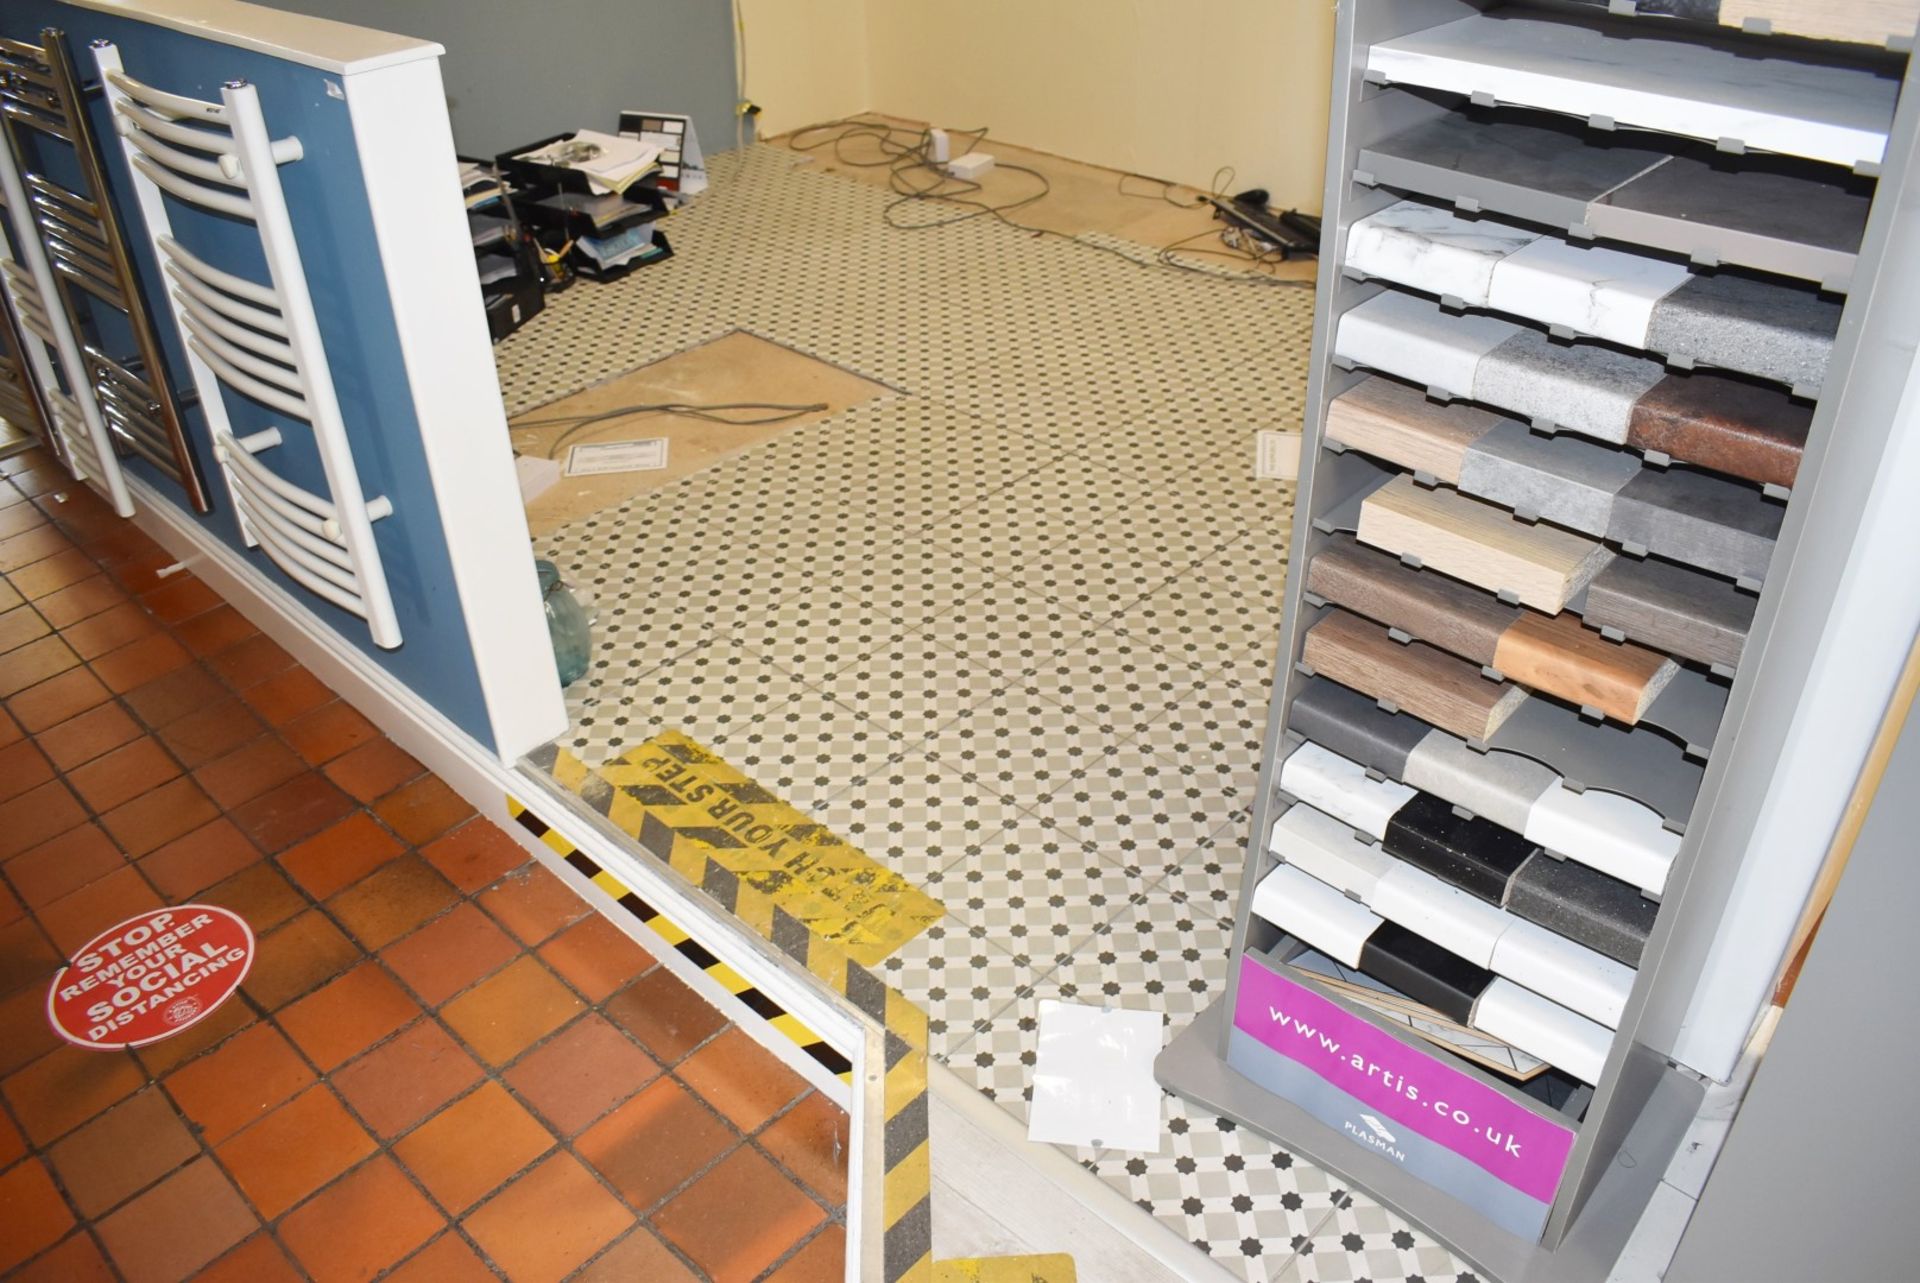 1 x Large Amount of Raised Flooring From a Retail Showroom Environment - Image 11 of 18